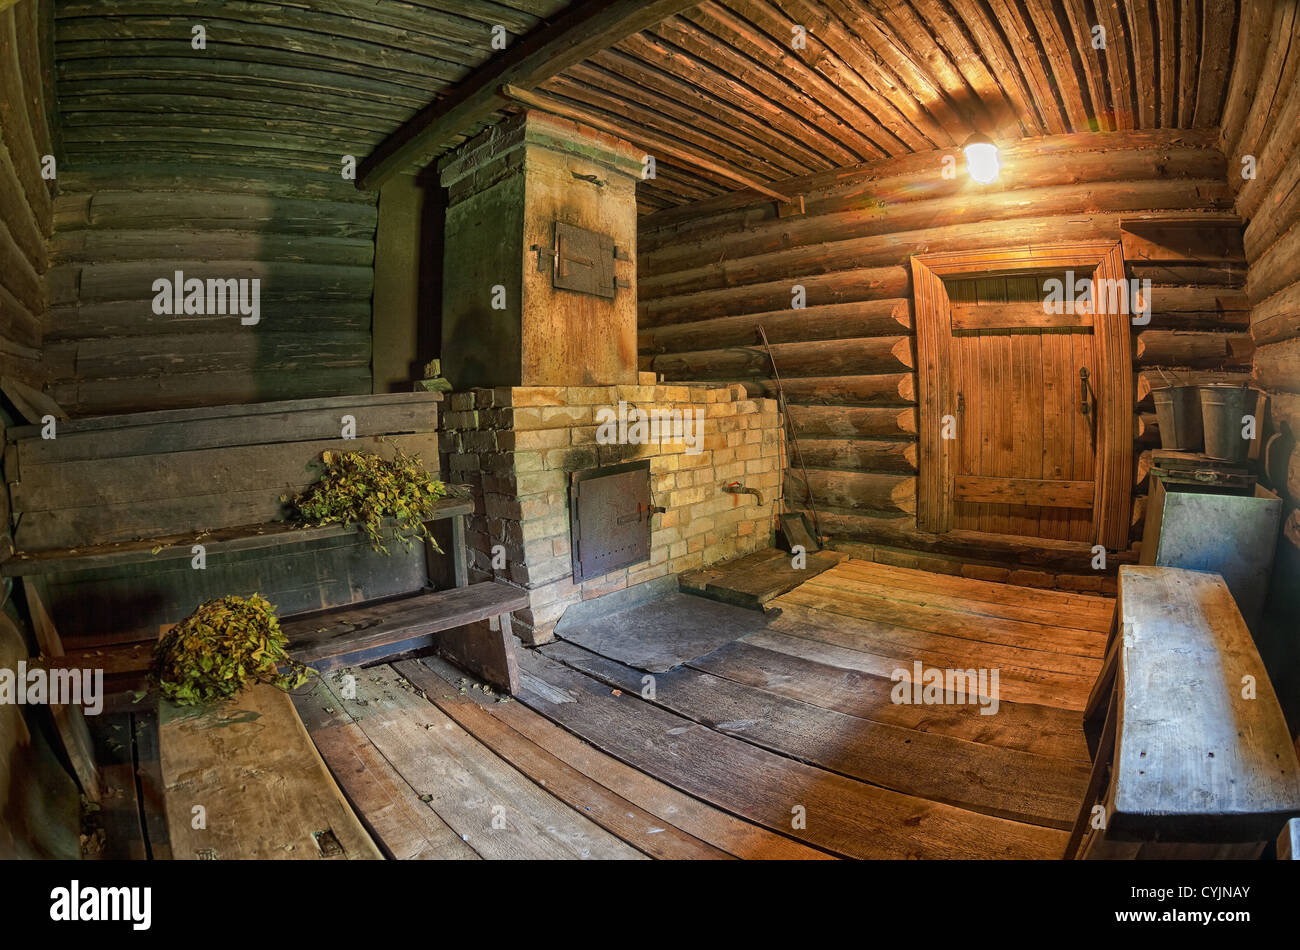 Brick oven in a traditional russian bath Stock Photo